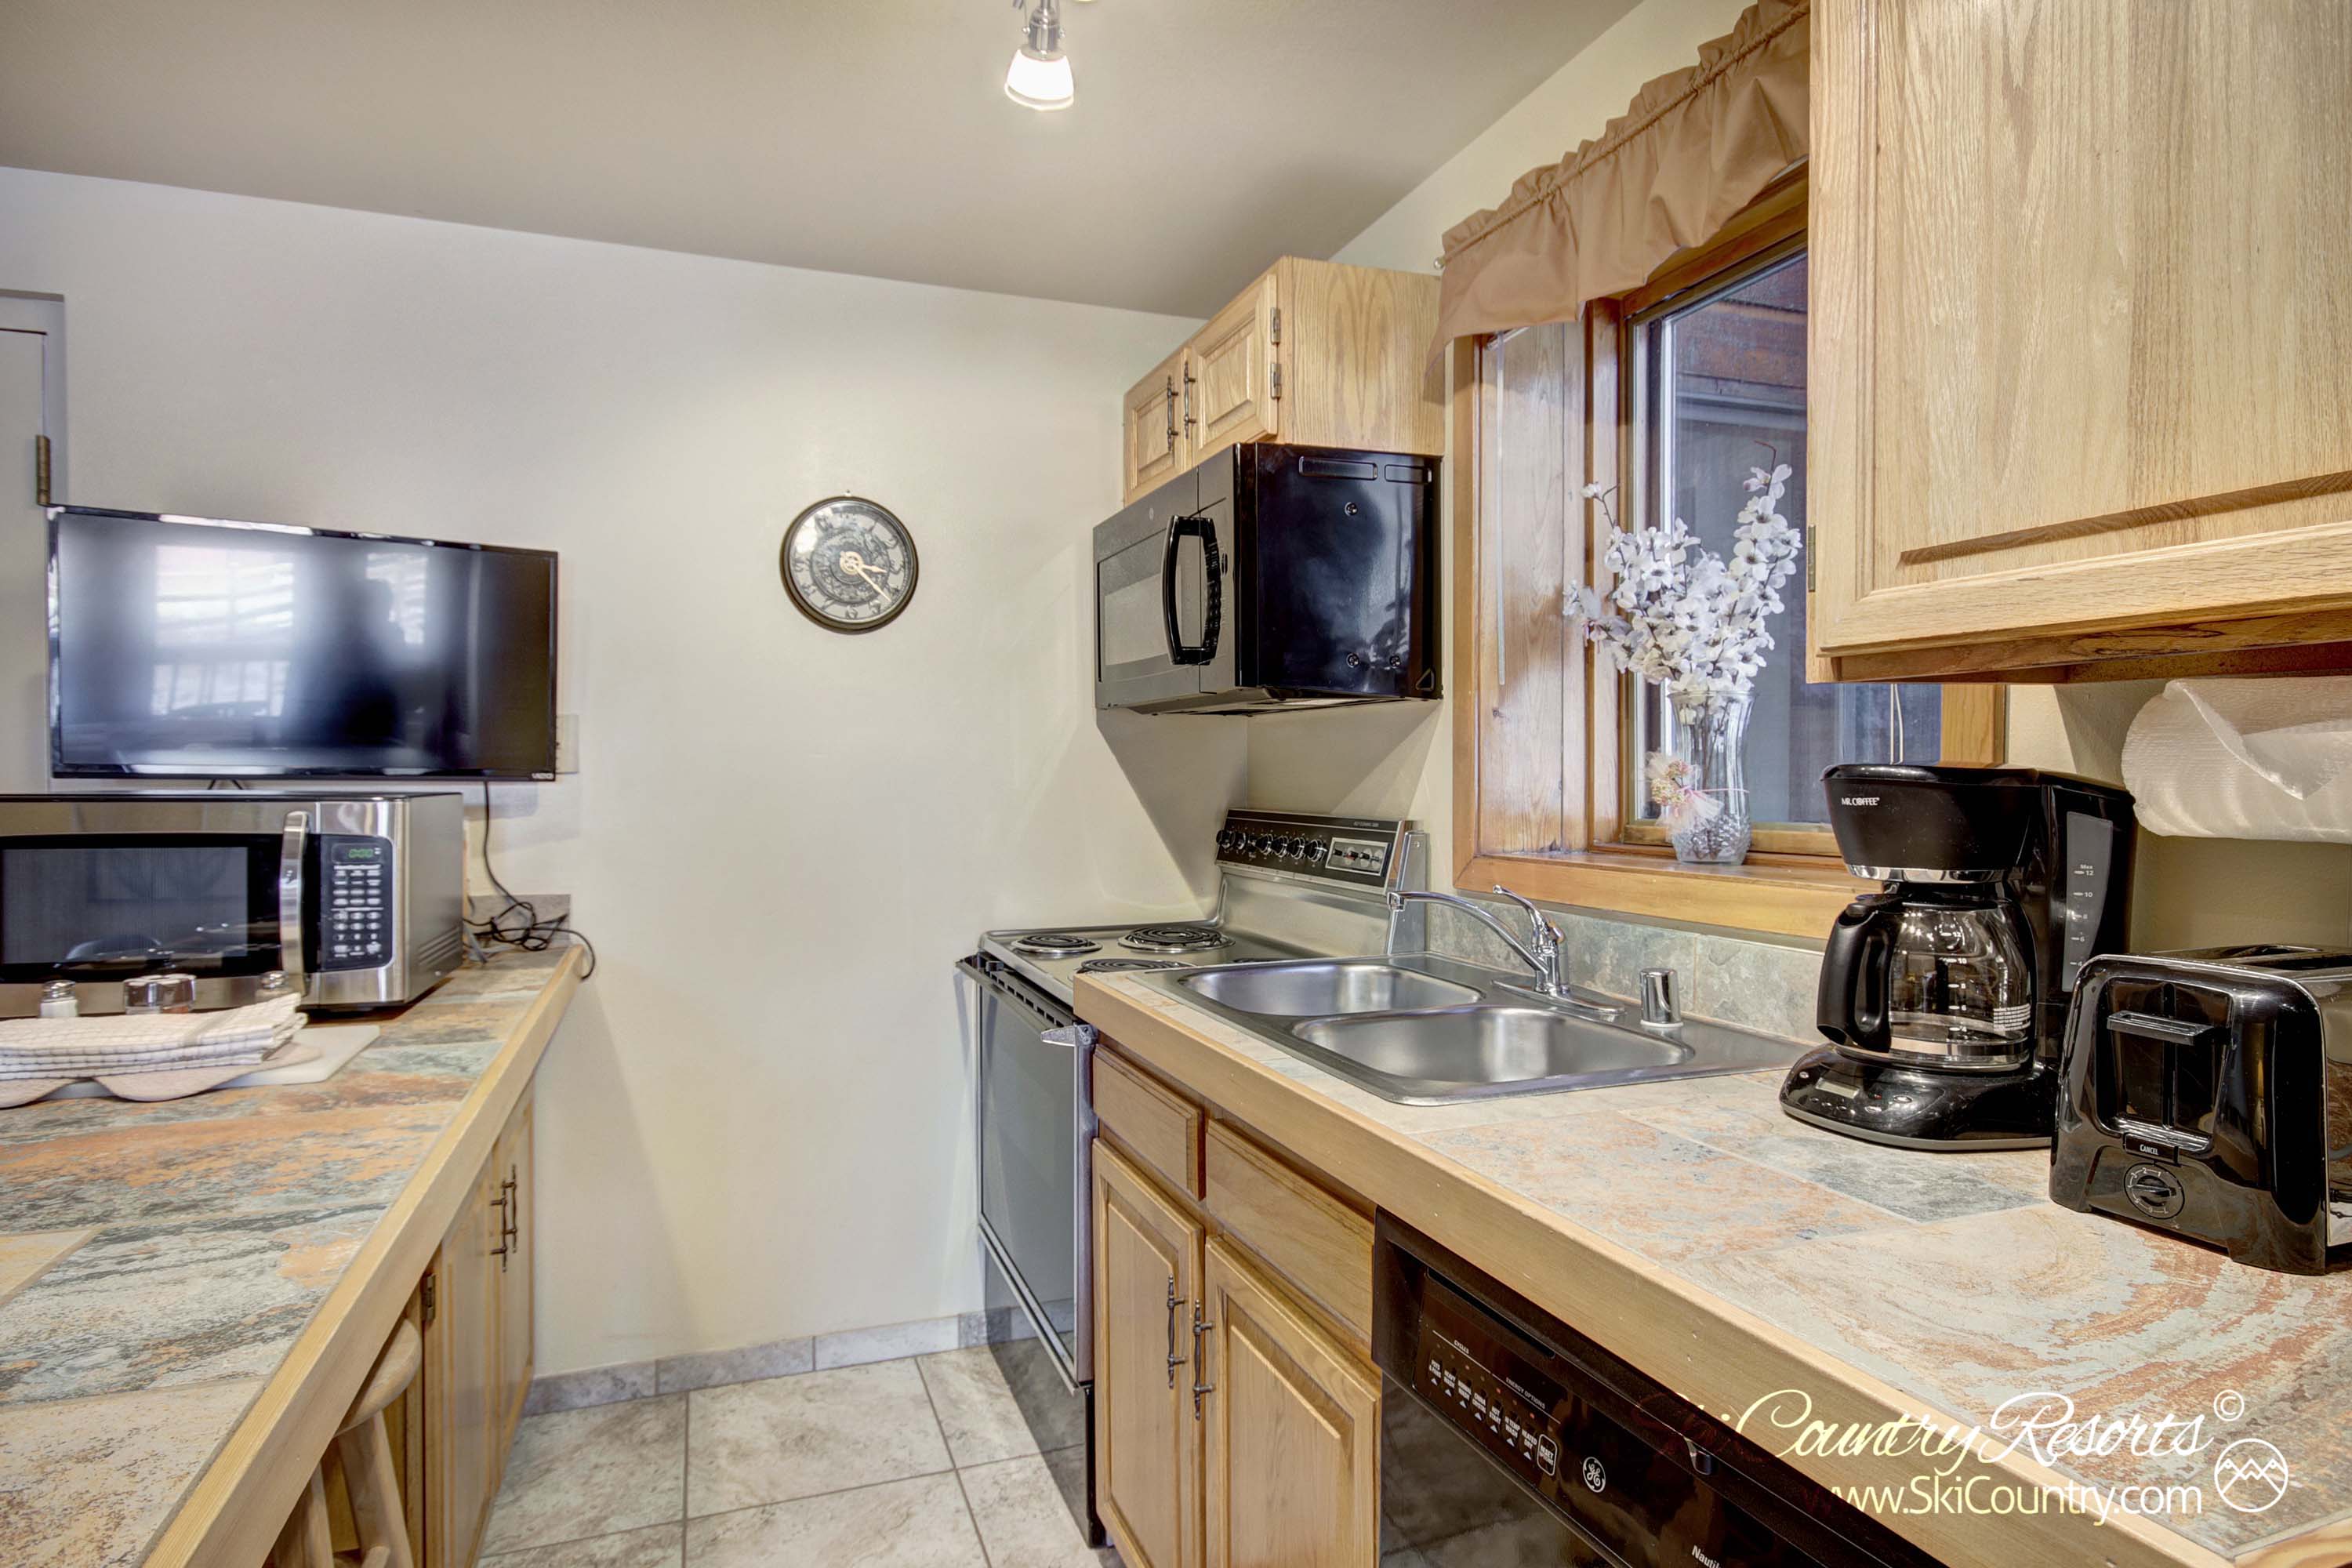 Kitchen is equipped with all appliances needed at your ''home away from home''! Stove/Oven, Microwave, Dishwasher, Coffee Maker and Toaster.